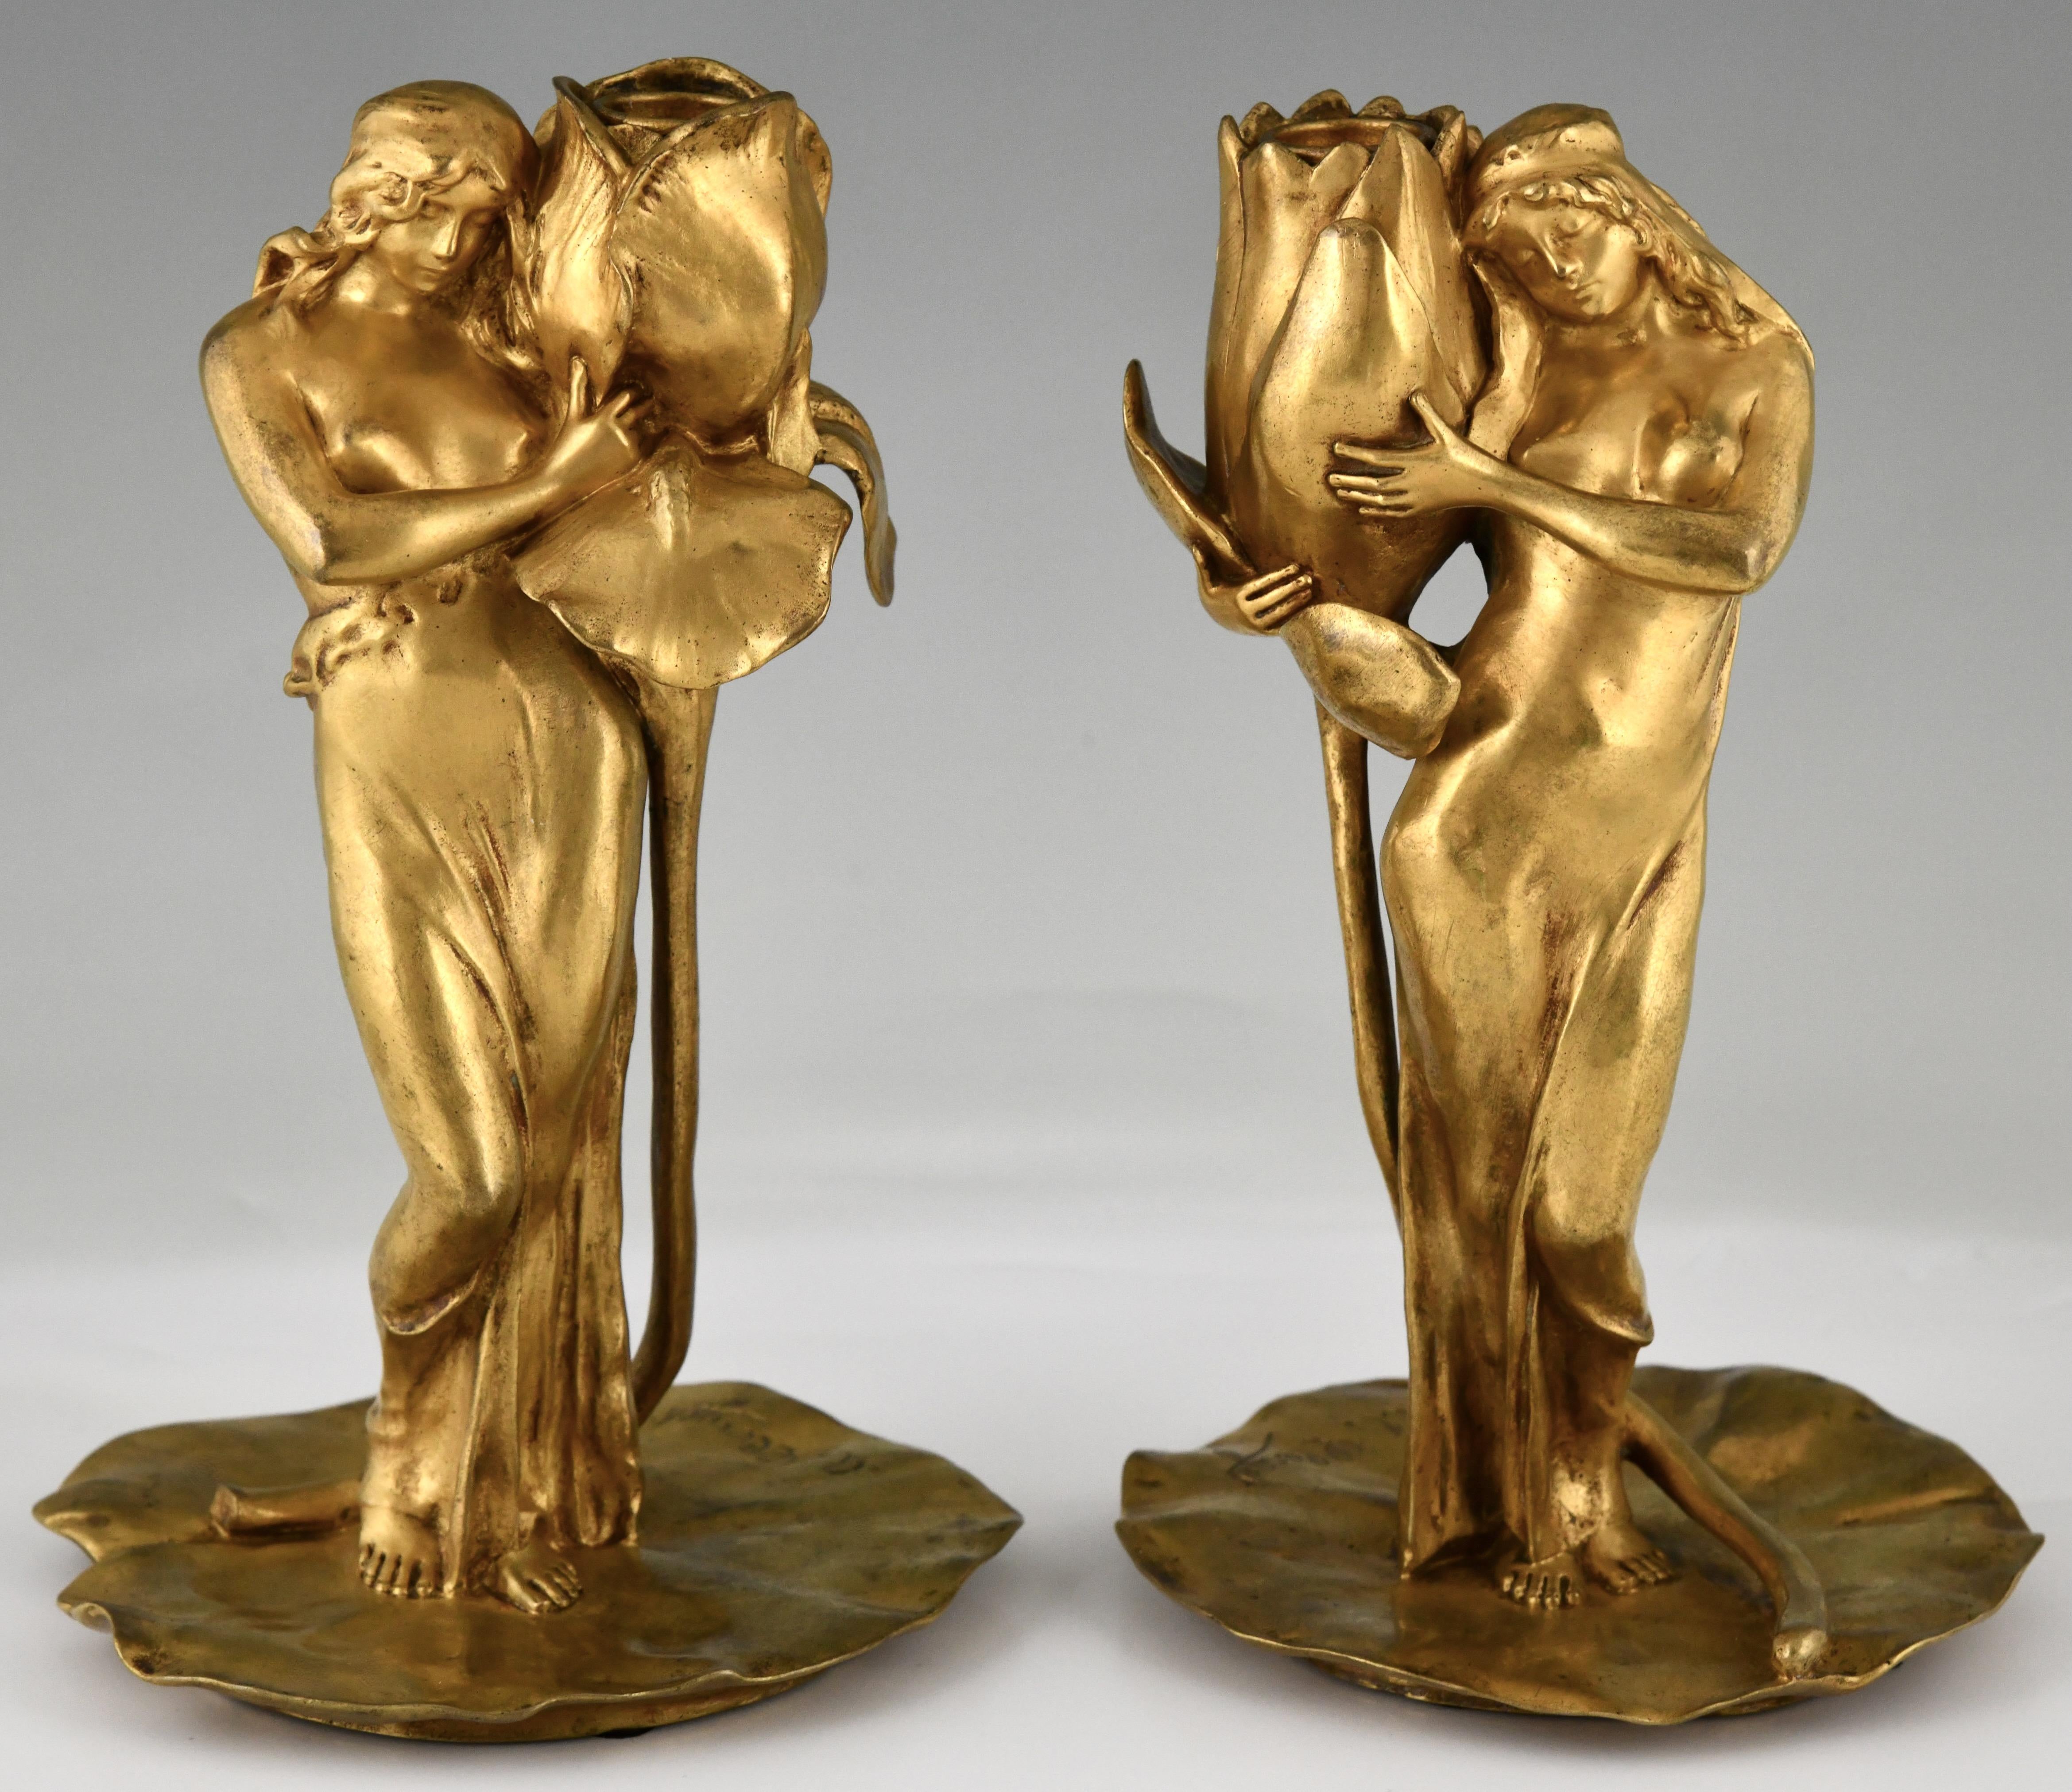 Pair of Art Nouveau gilt bronze candlesticks lady with flower Iris and Lotus by Alexandre Clerget.
Siot Decauville Paris foundry mark. 
France 1900. 
This pair is illustrated on page 115 of the book  Dynamic Beauty,  Macklowe Gallery  and in